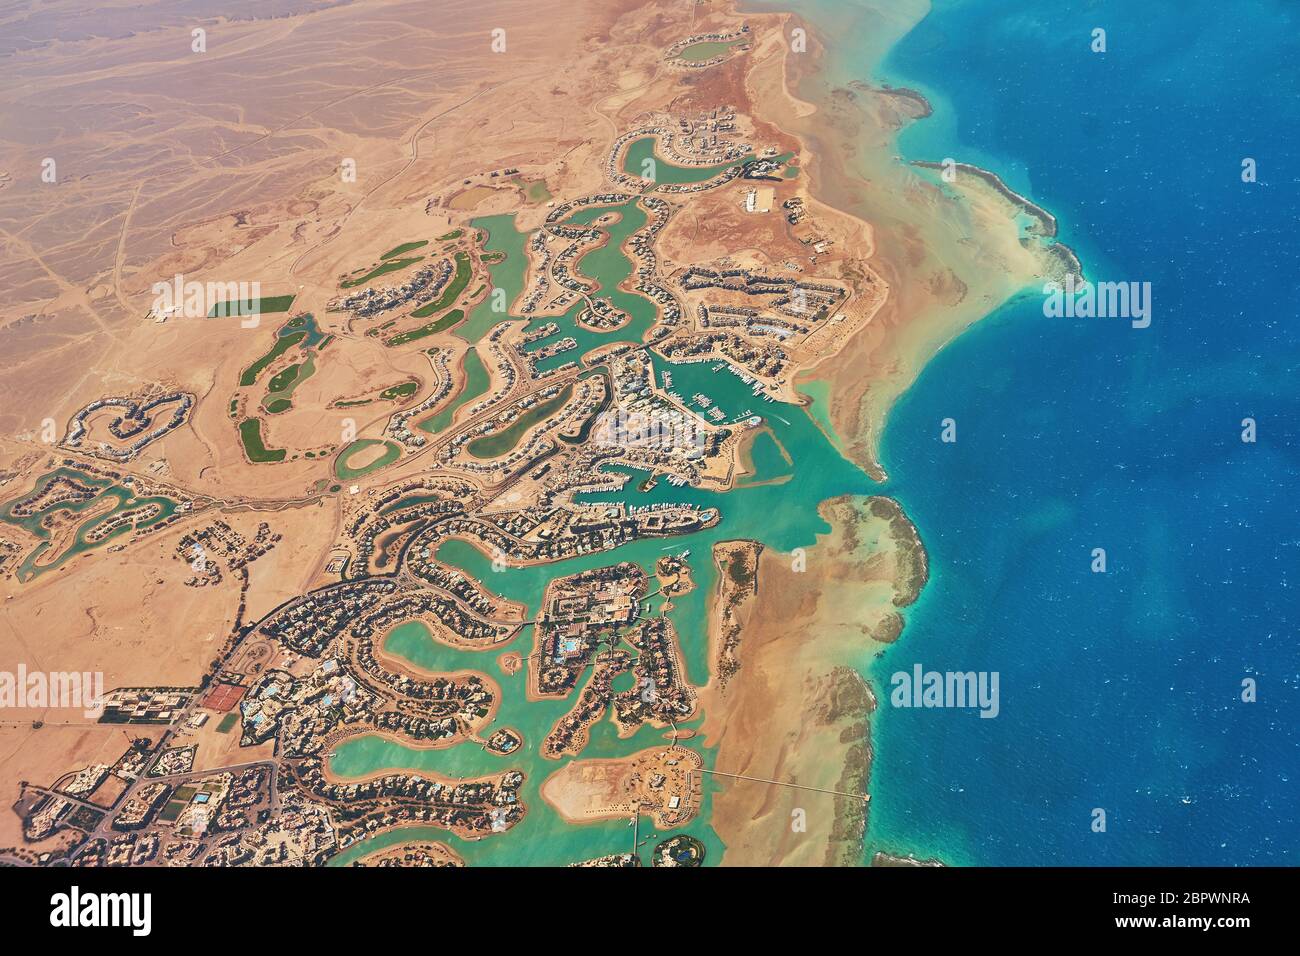 Aerial view of El Gouna a luxury Egyptian tourist resort located on the Red Sea 20 kilometres north of Hurghada. Stock Photo